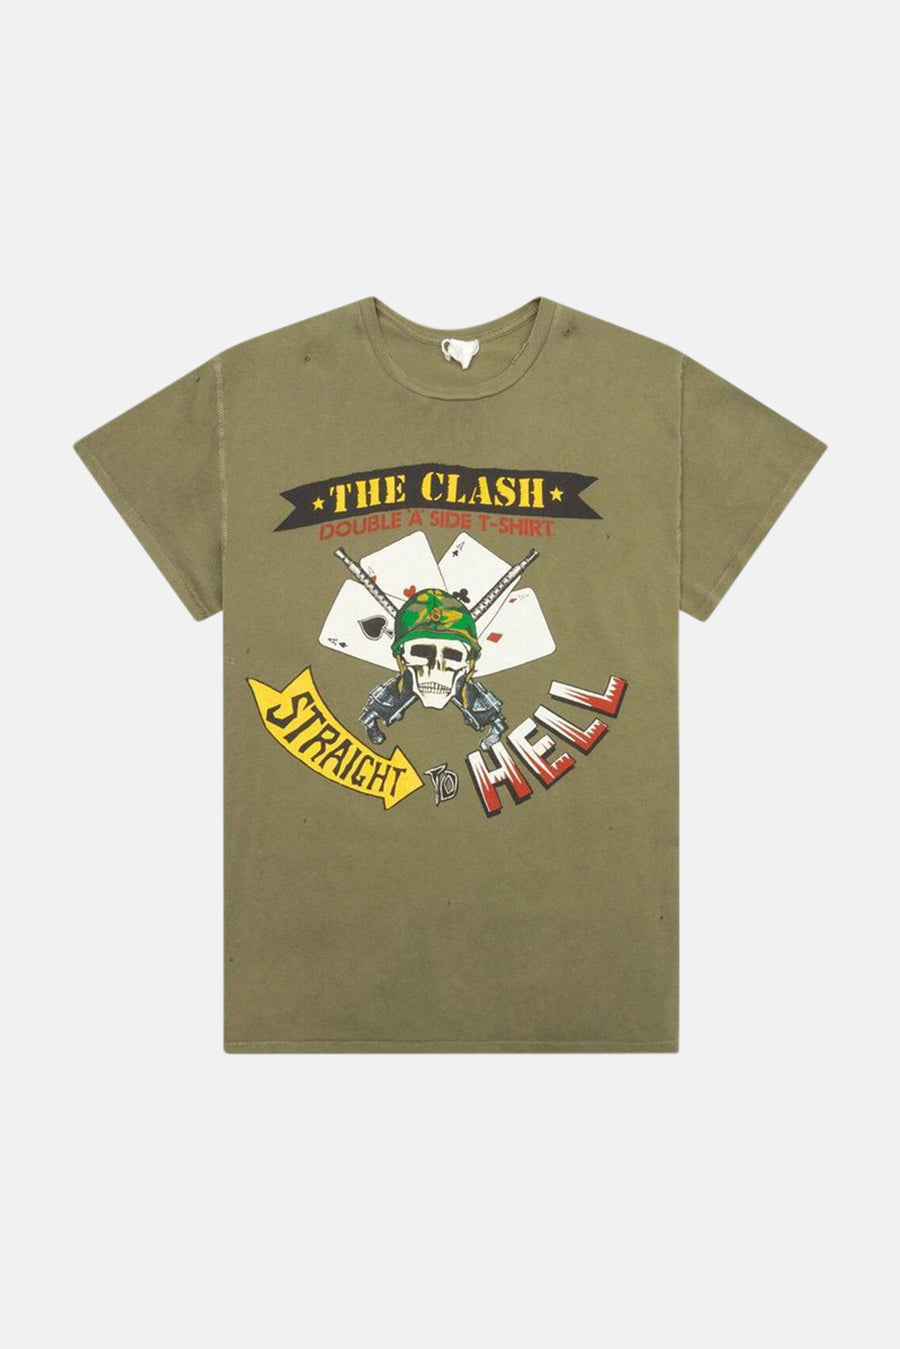 The Clash Straight to Hell Tee Army Fade - blueandcream